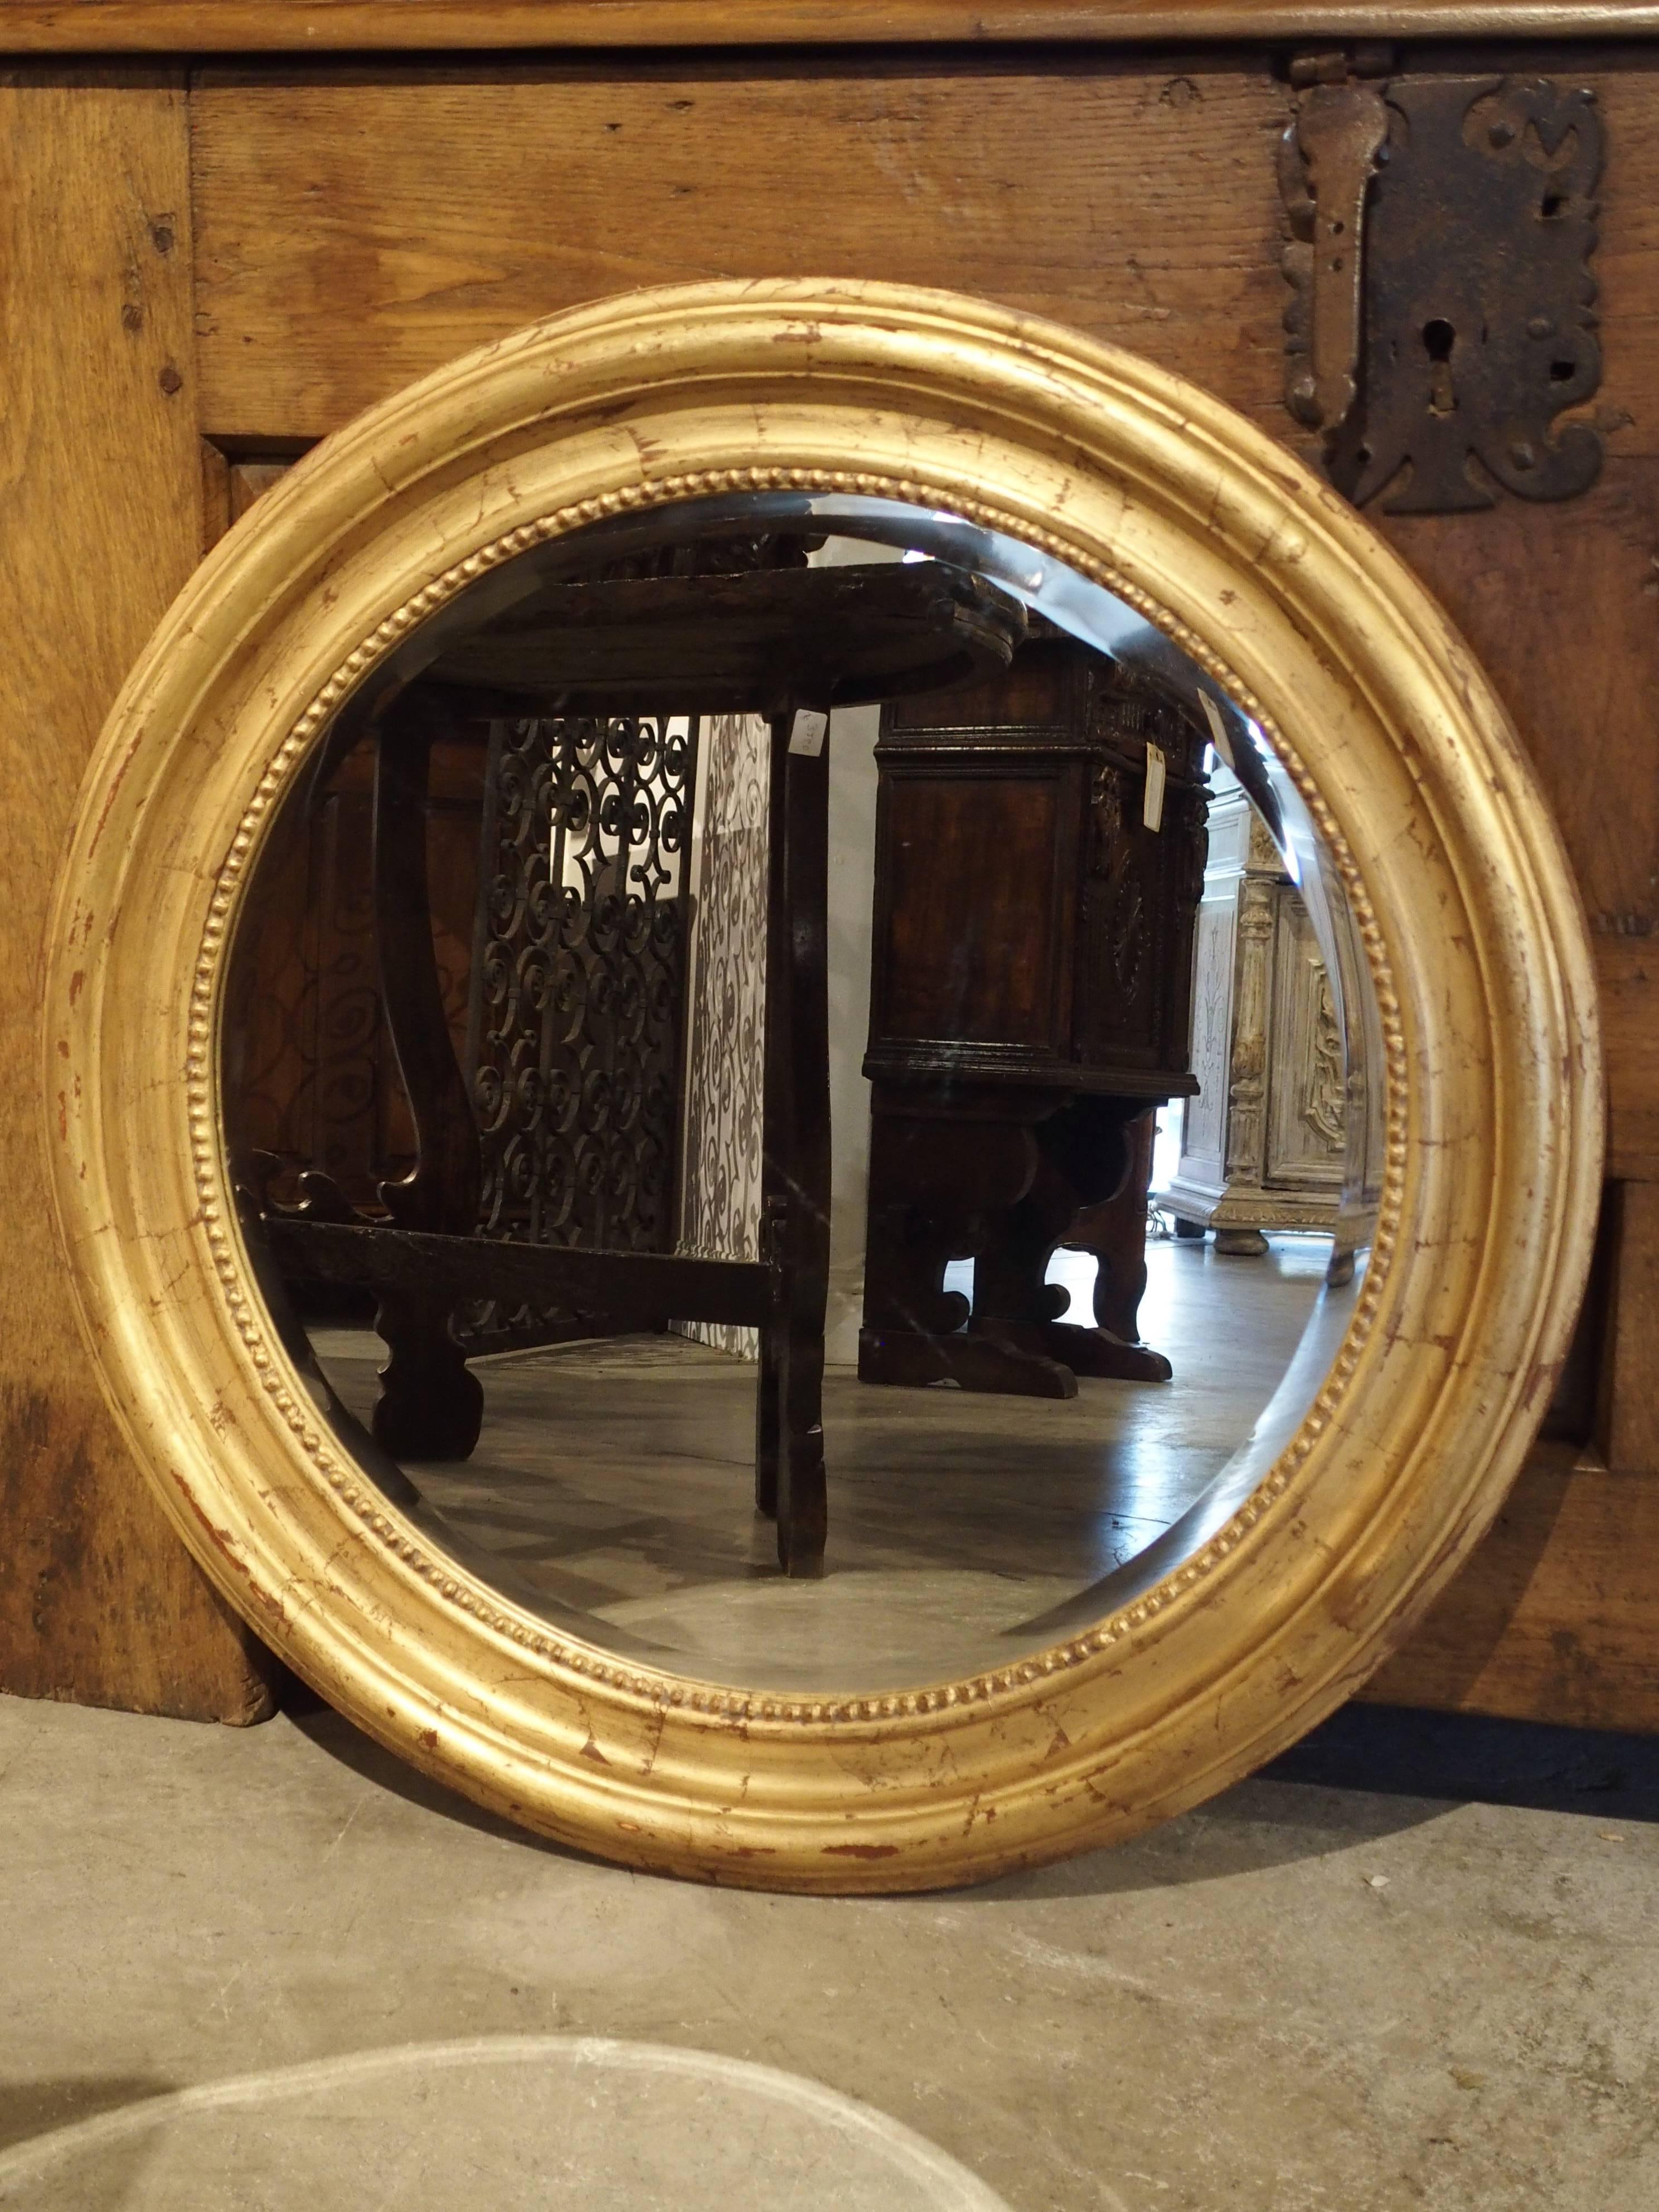 From France, this unusual round, Louis Philippe style mirror has beading surrounding the bevel of the mirror. All period Louis Philippe mirrors are rectangular, so this is a wonderful take on the late 19th century mirror. The frame has raised and